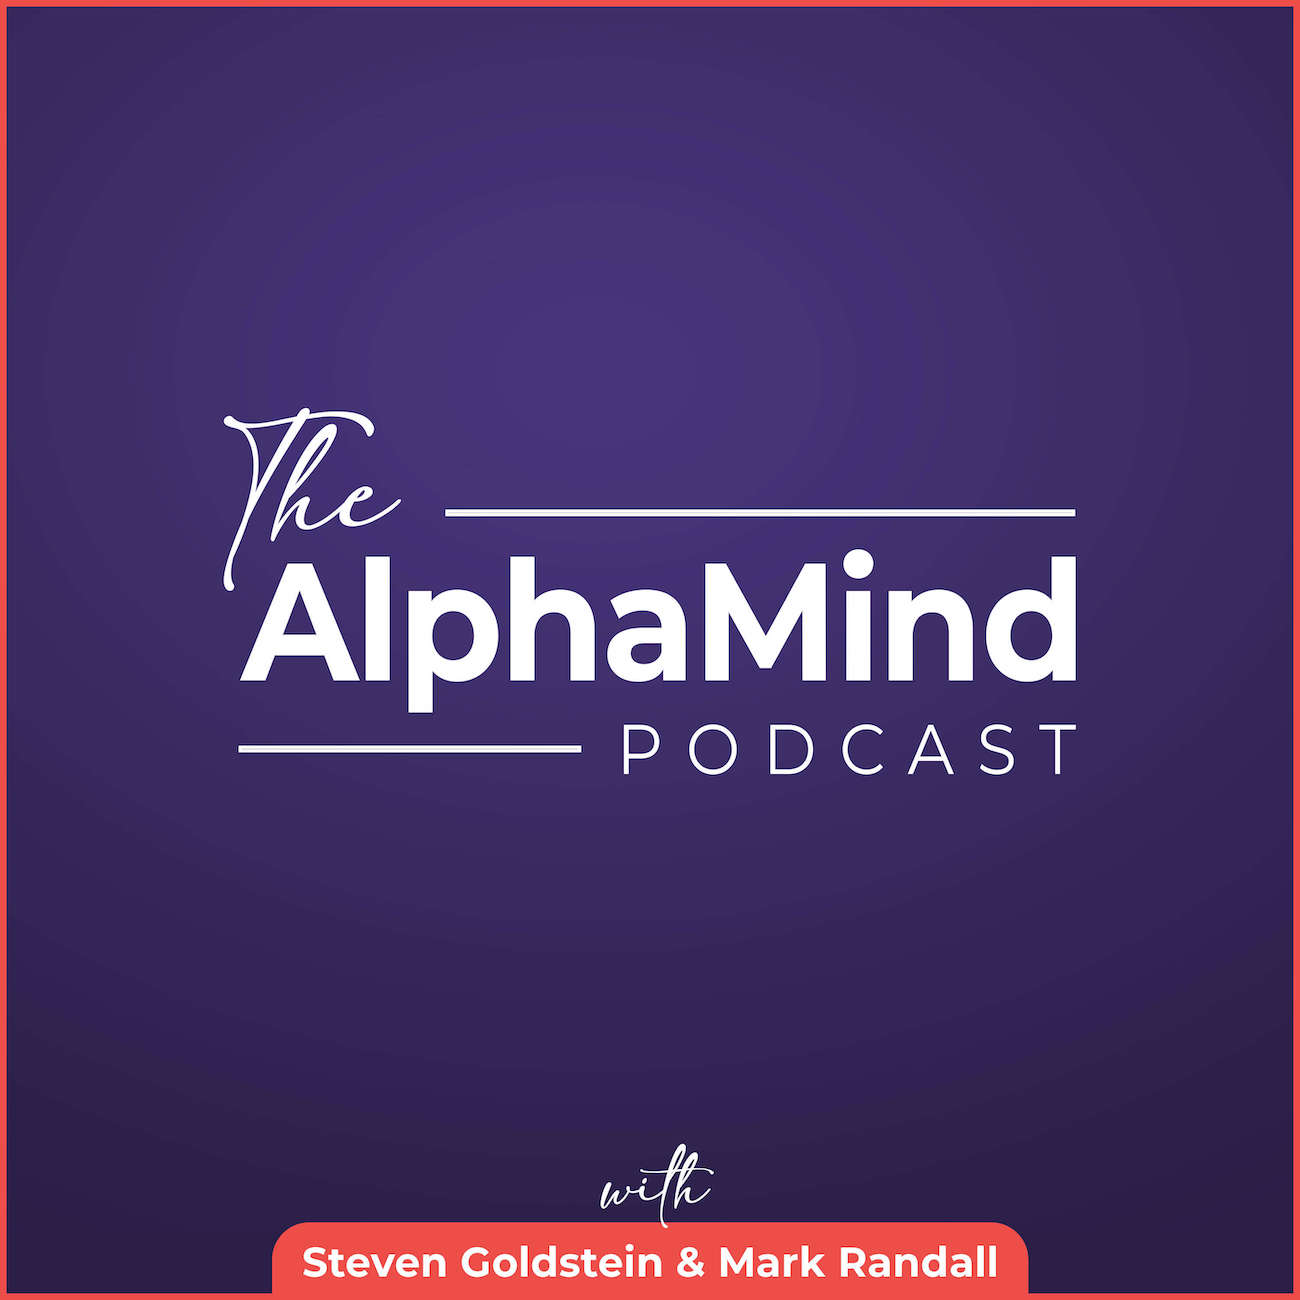 What is The AlphaMind Podcast Hosted By Steven Goldstein?